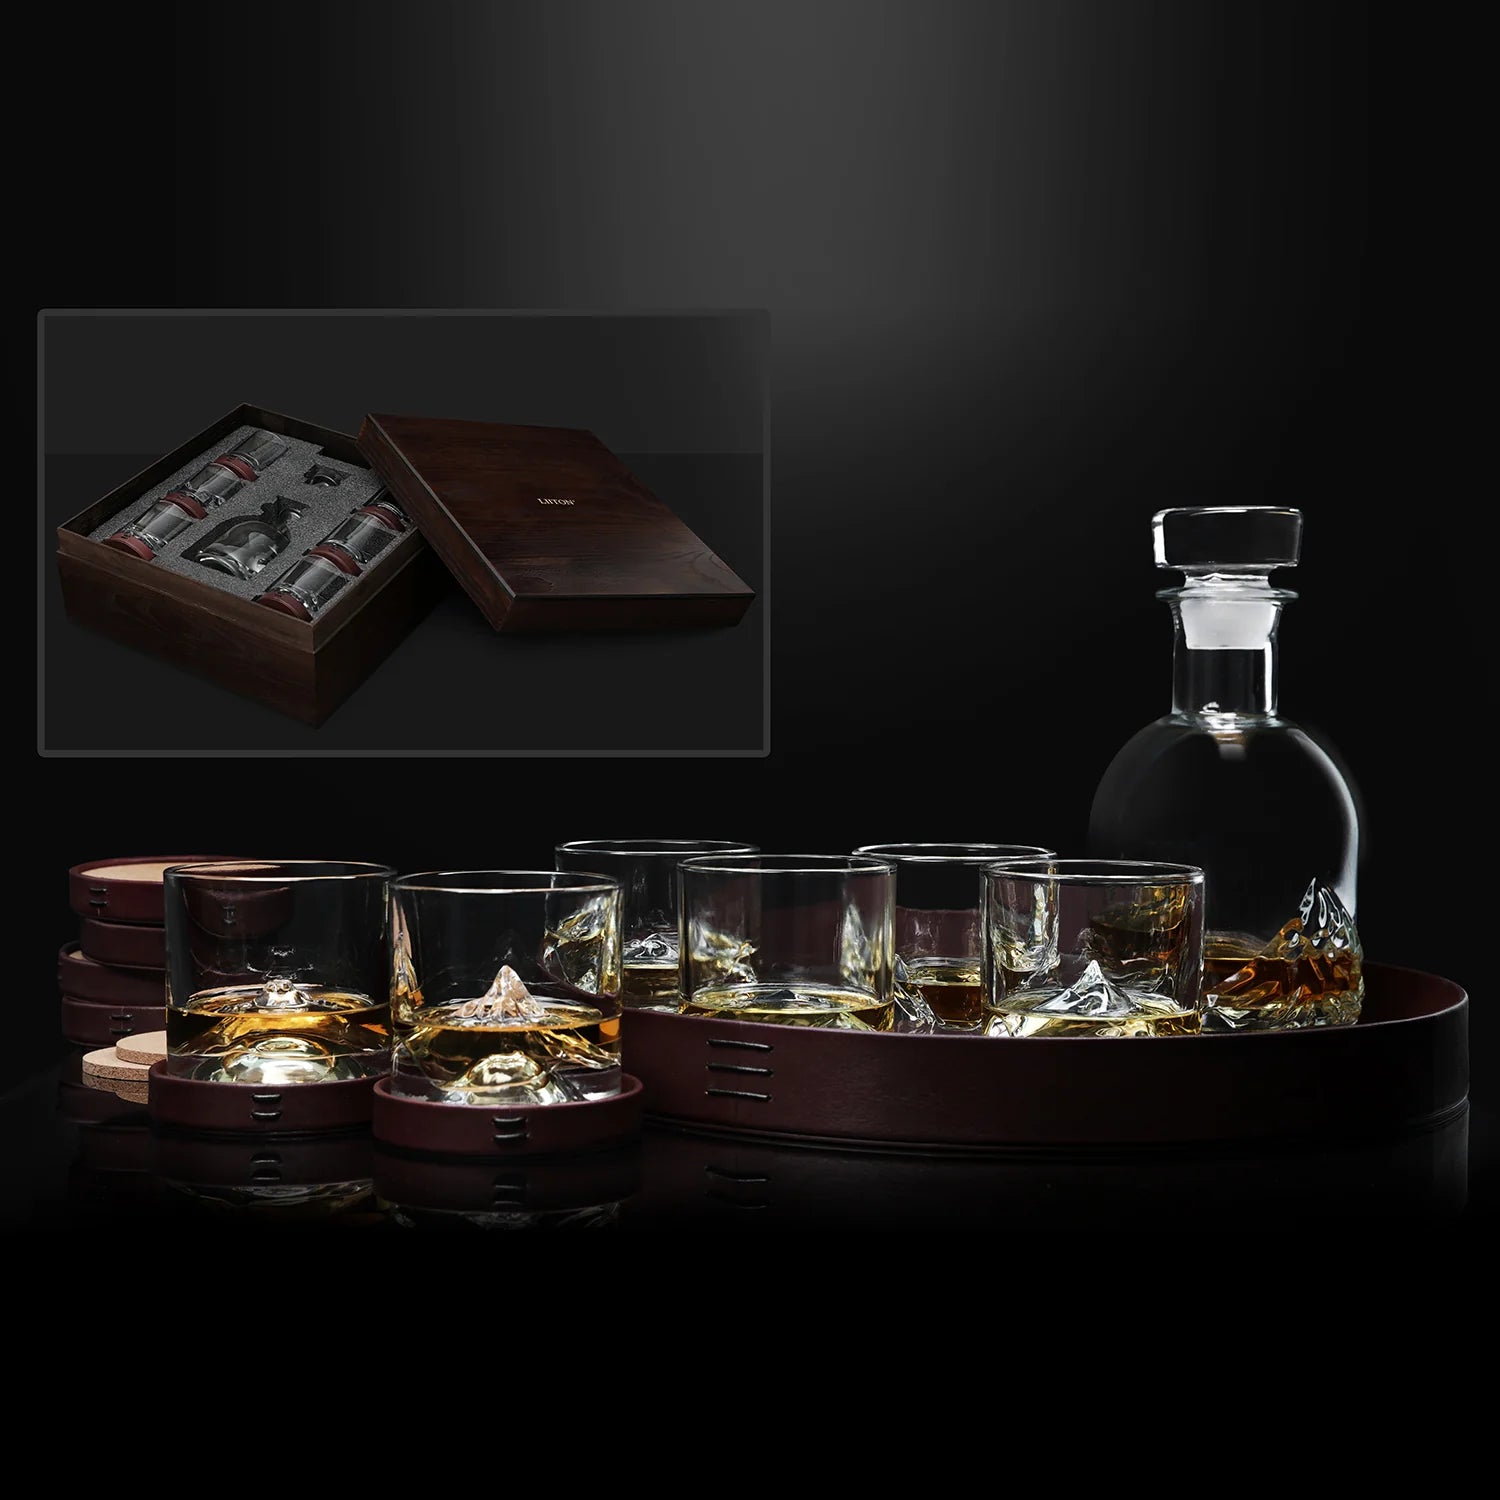 Father's Day Engraved Deluxe Square Whiskey Decanter PLUS 2 Scotch Glasses